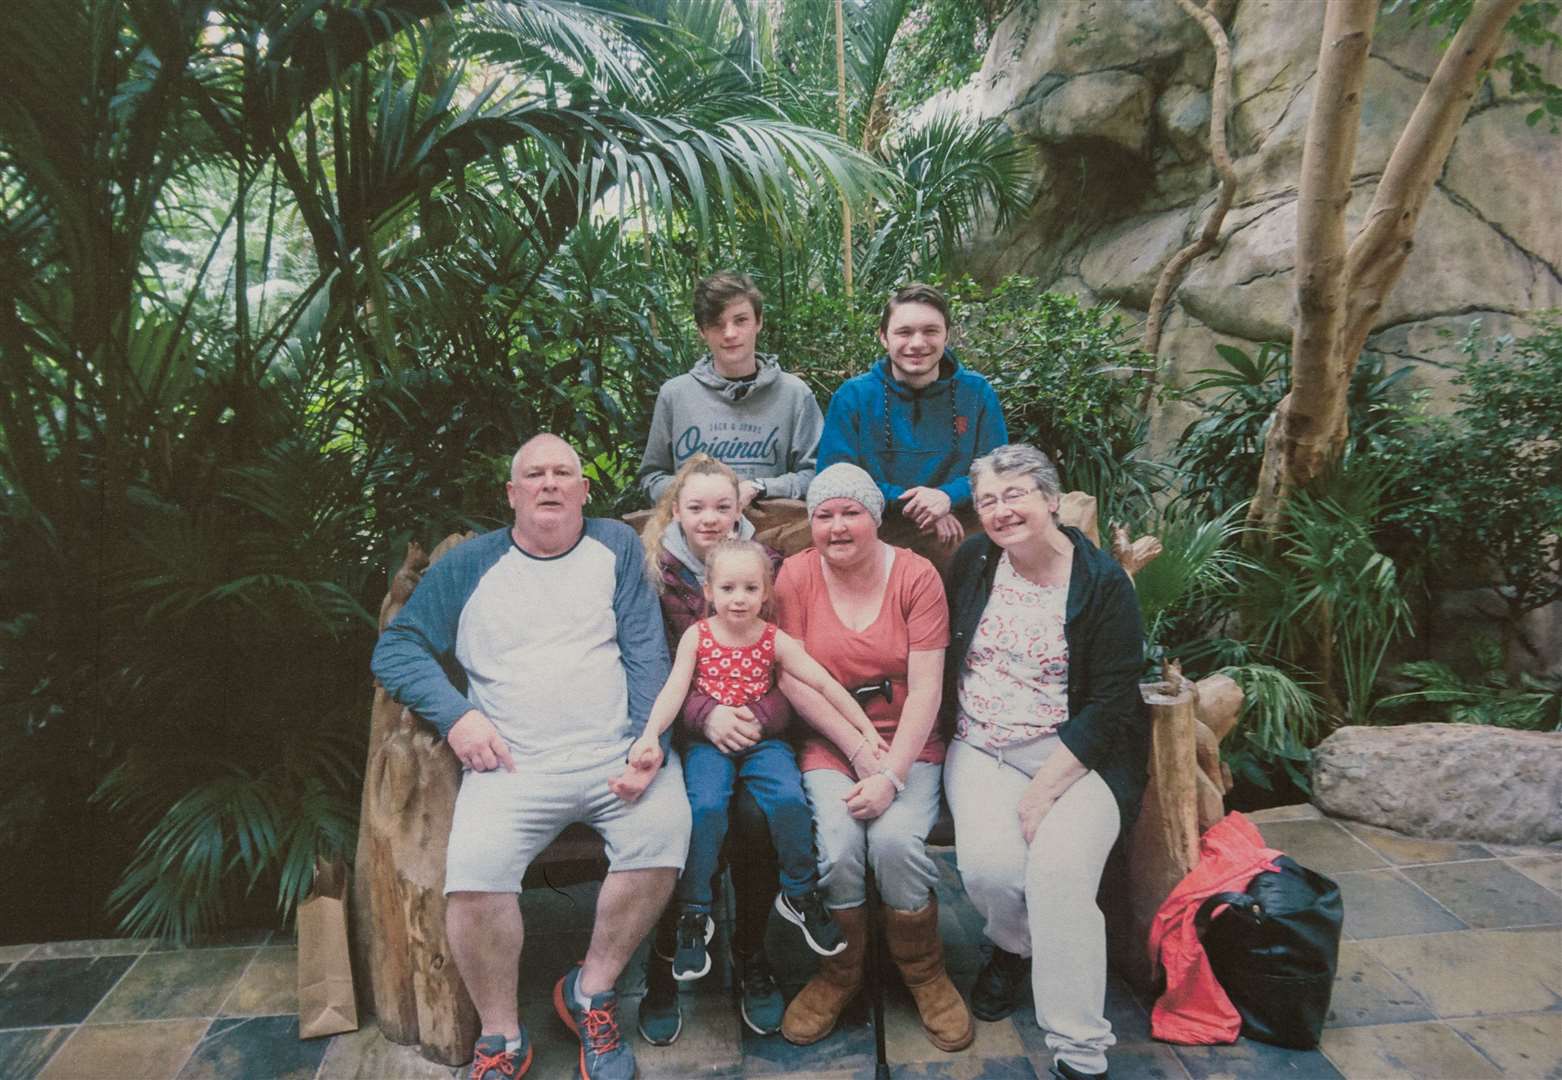 Louise MacKay (front, second right) with her family.